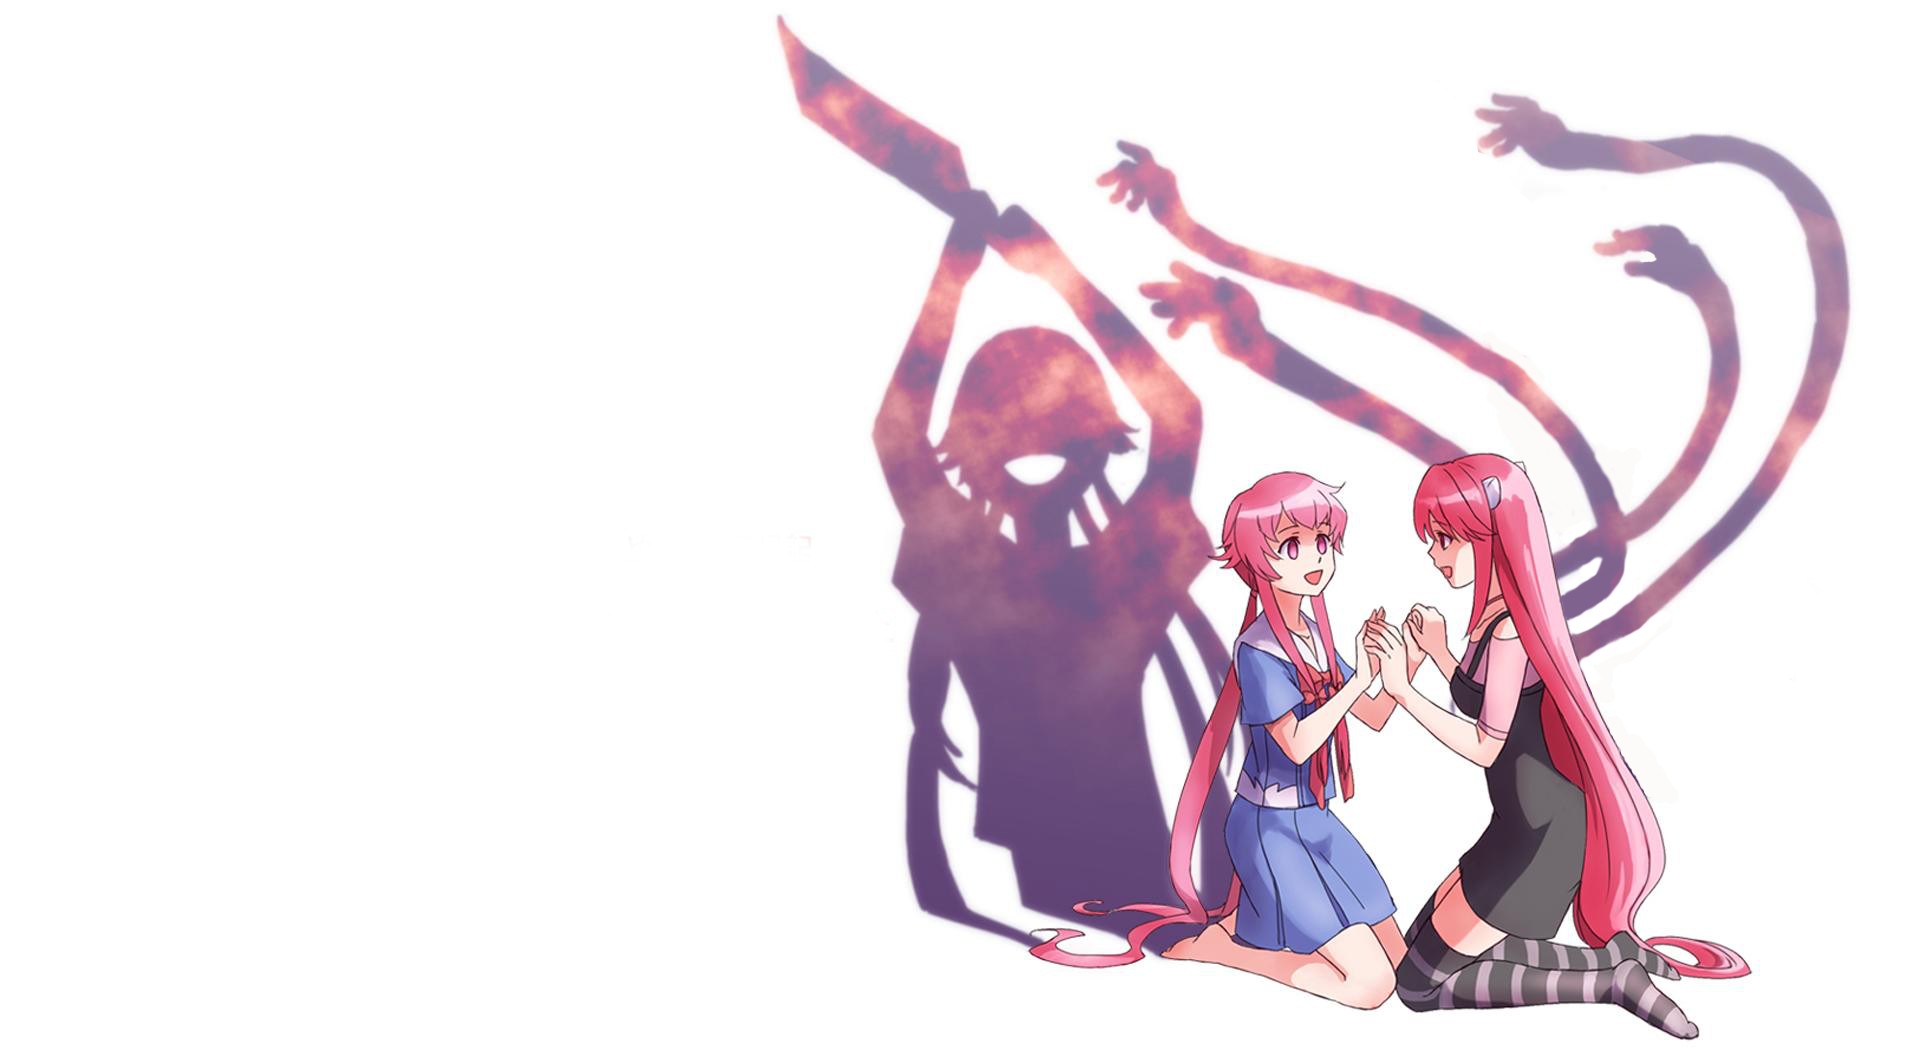 A Review of the Elfen Lied, an Anime by Kanbe Mamoru | Unwinnable